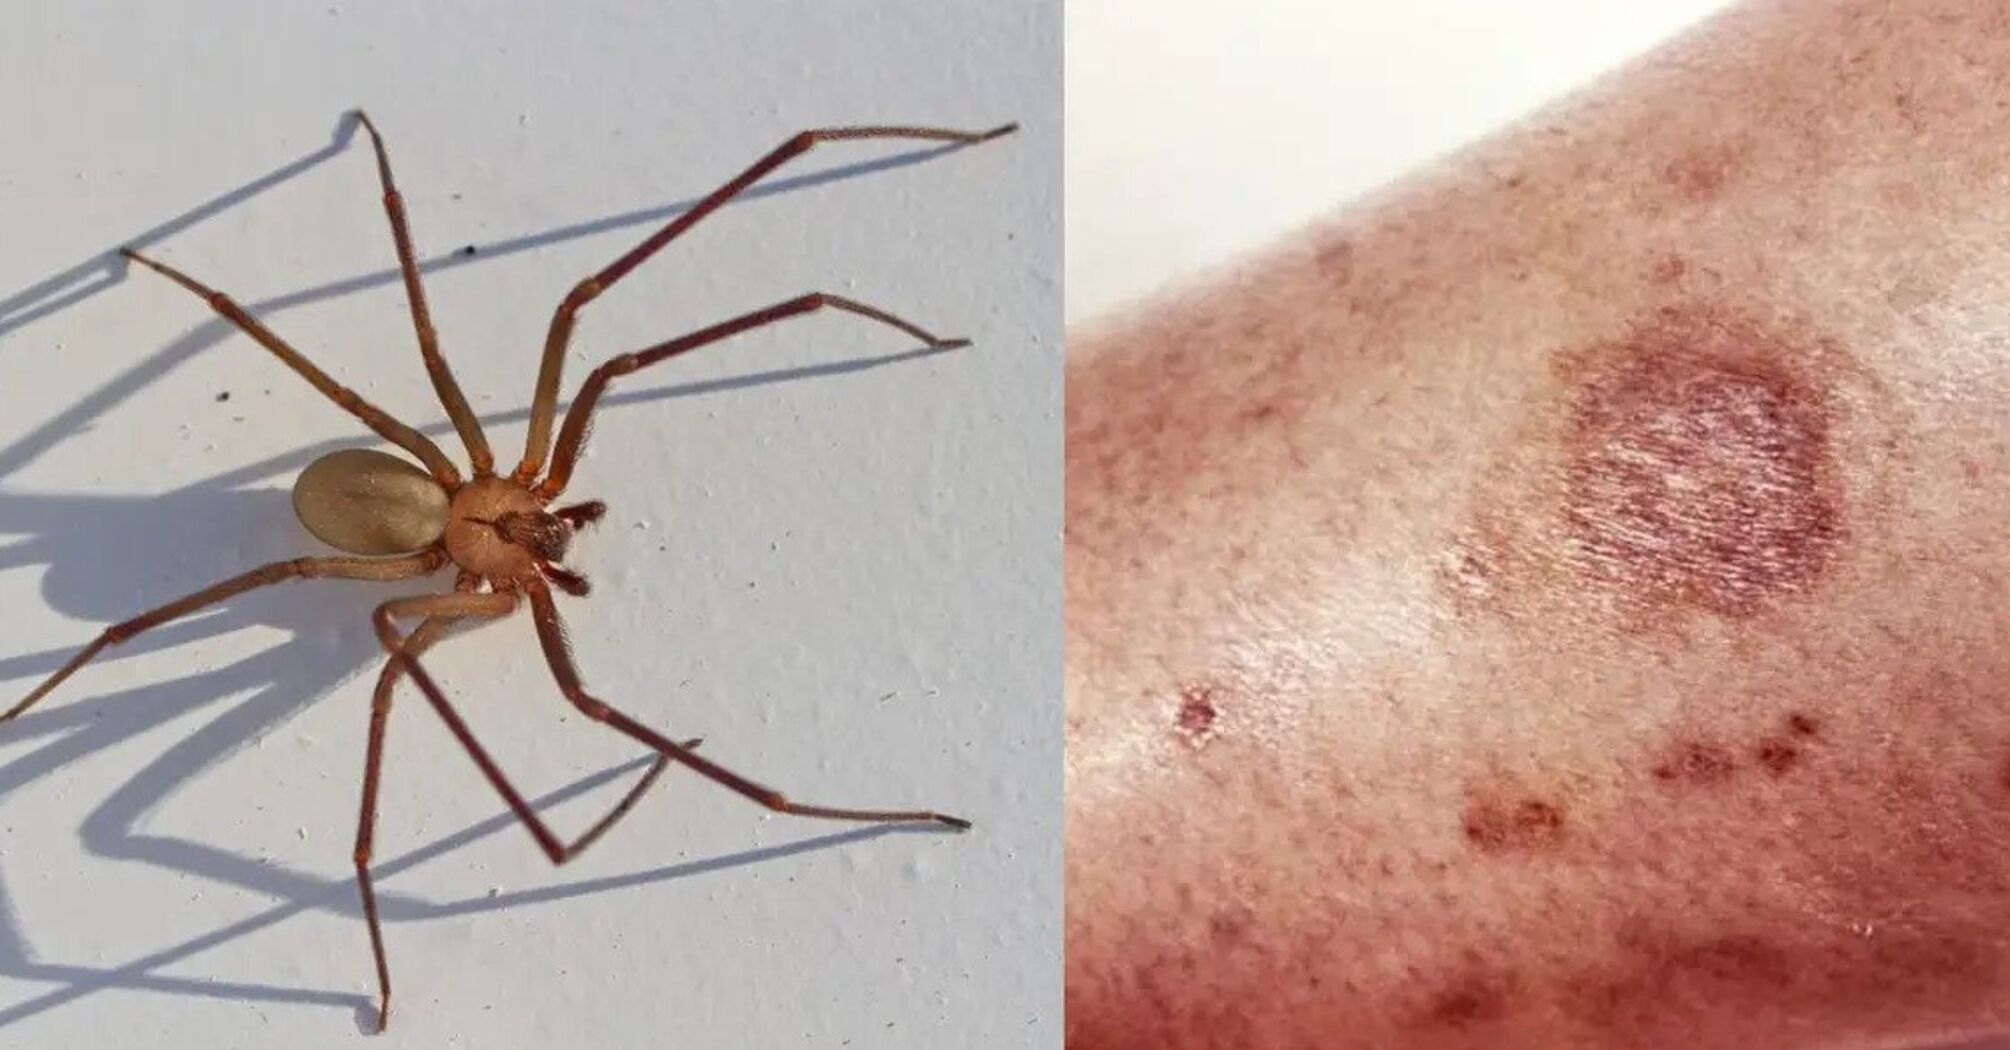 What a poisonous spider bite looks like